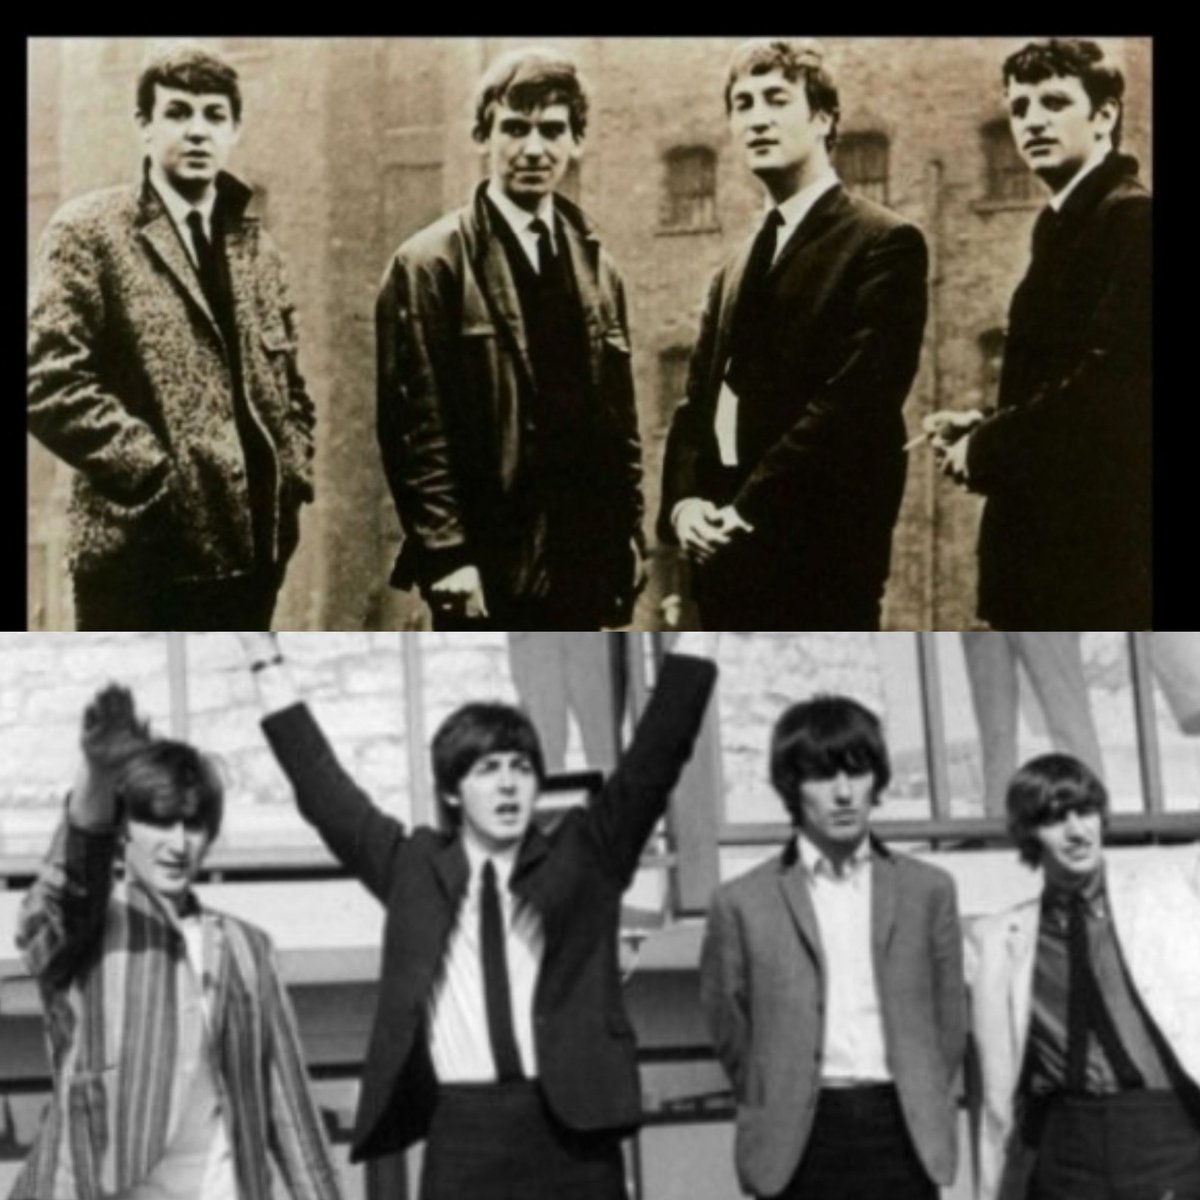 @bellfact The last album to feature The Beatles was A Hard Day's Night, which they weren't alive to see the release of because it also features tracks recorded by their imposter replacements.